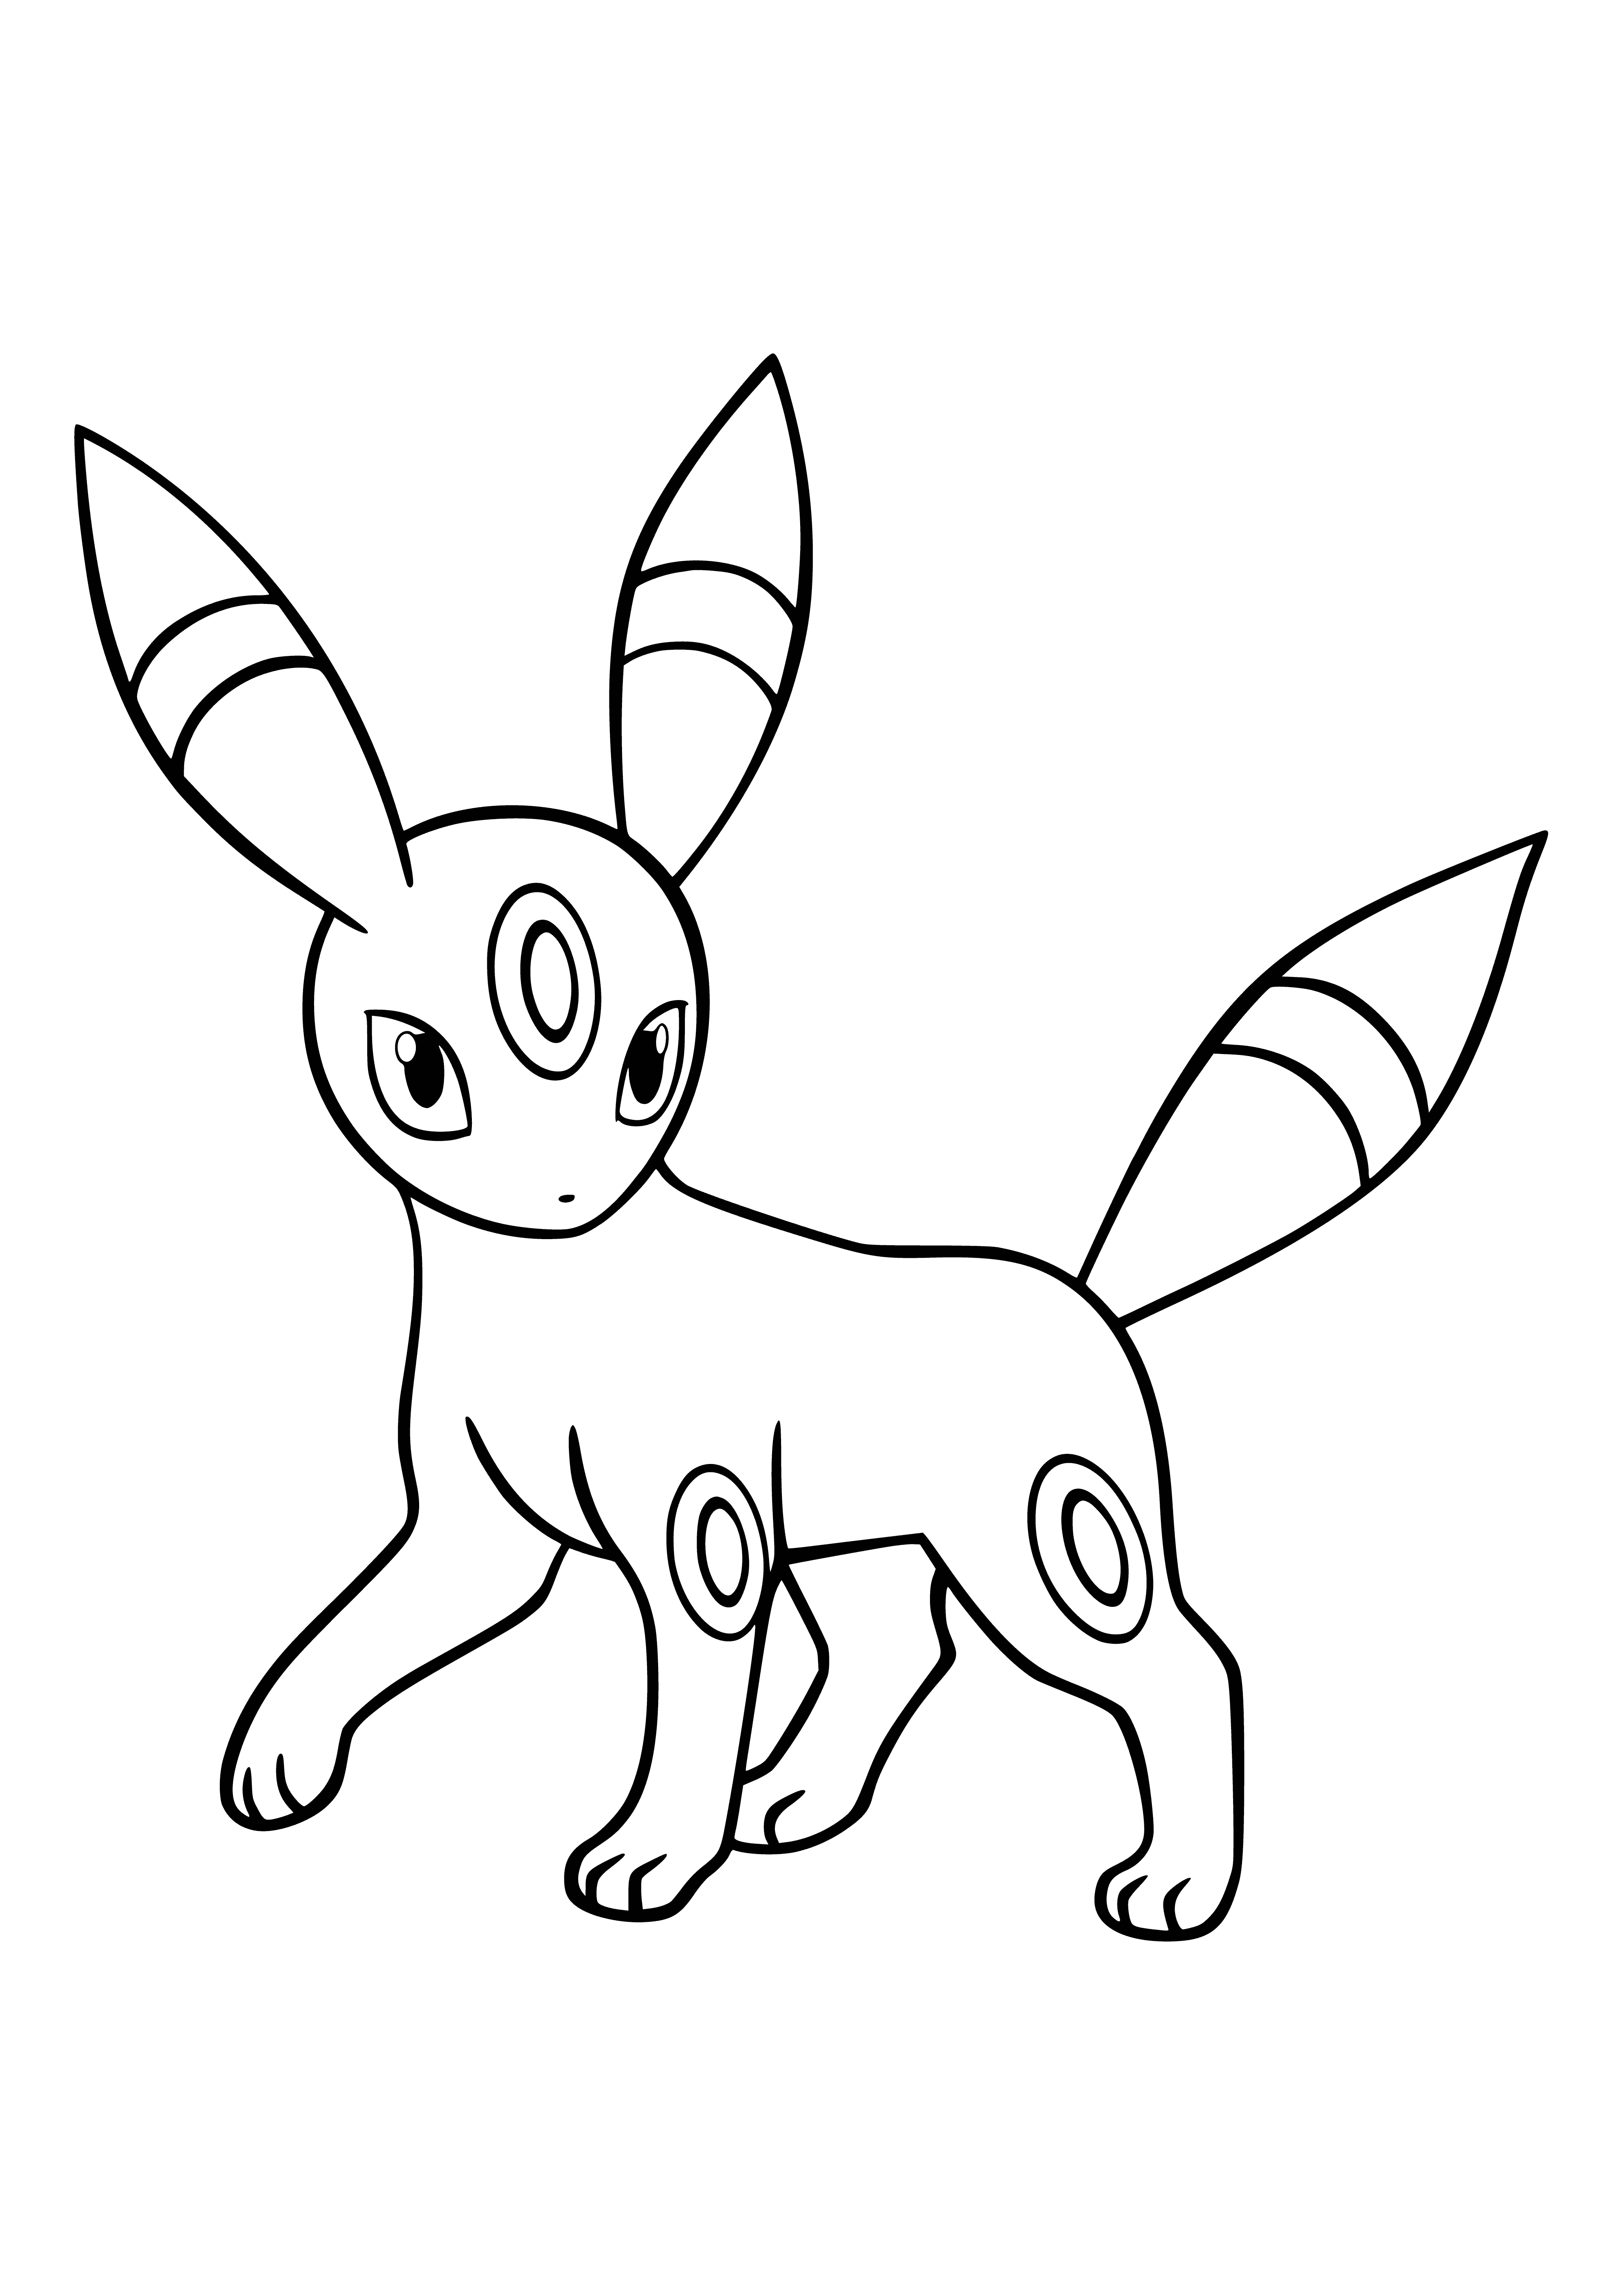 coloring page: Umbreon is a dark-type Pokémon evoking fear w/ long claws & eerie glowing rings. Evolves from Eevee when exposed to a Moon Stone.